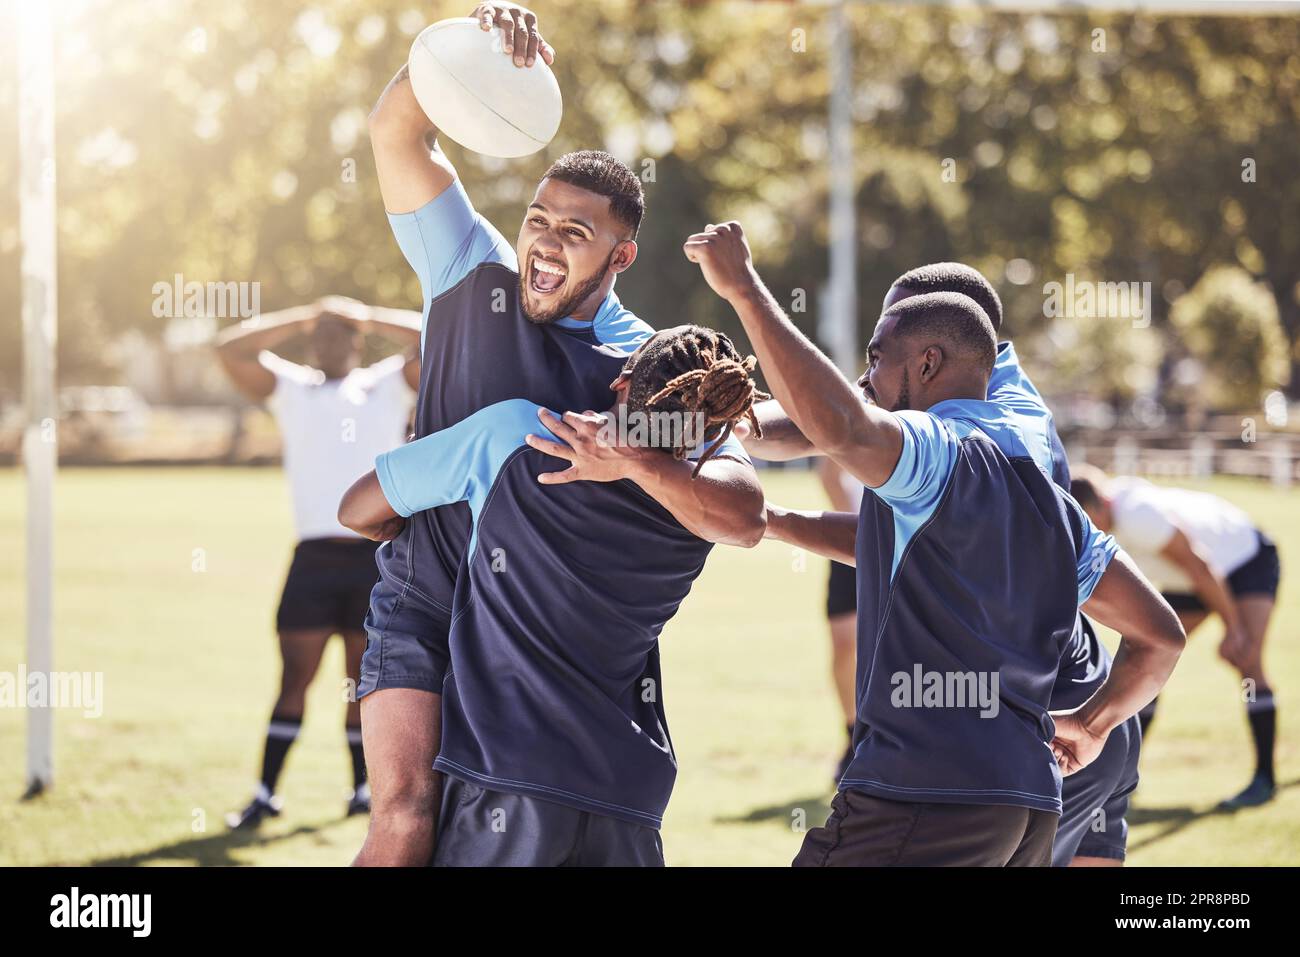 Diverse rugby teammates celebrating scoring a try or winning a match outside on a sports field. Rugby players cheering during a match after making a score. Teamwork ensures success and victory Stock Photo